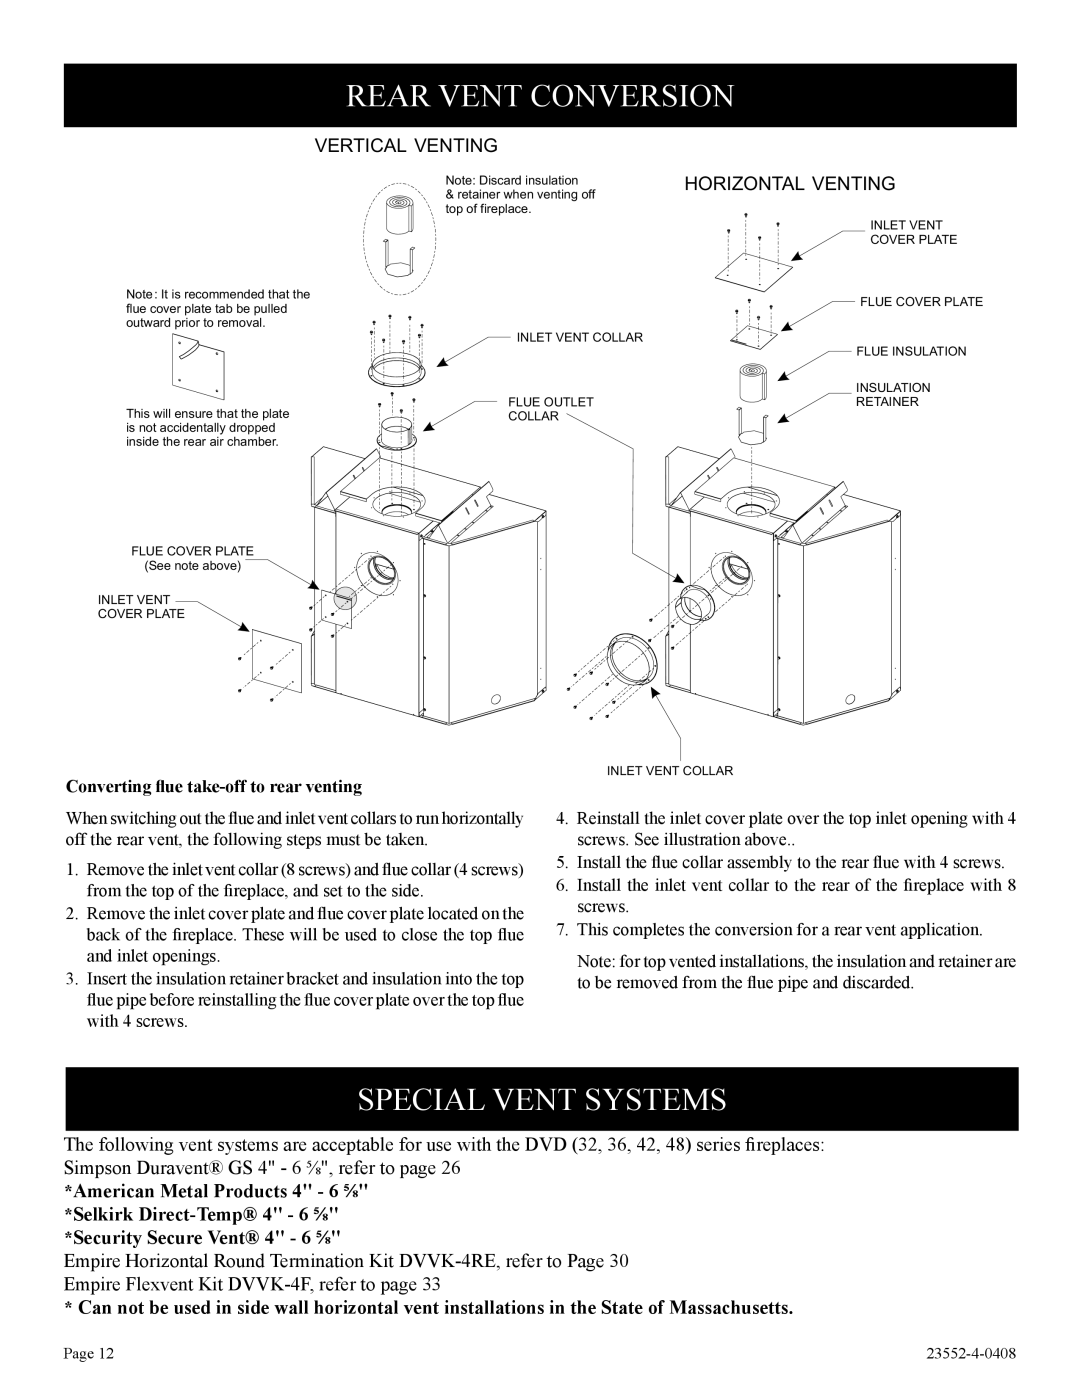 Empire Comfort Systems 1, DVD32FP3, 3)(N installation instructions Rear Vent Conversion, Special Vent Systems 